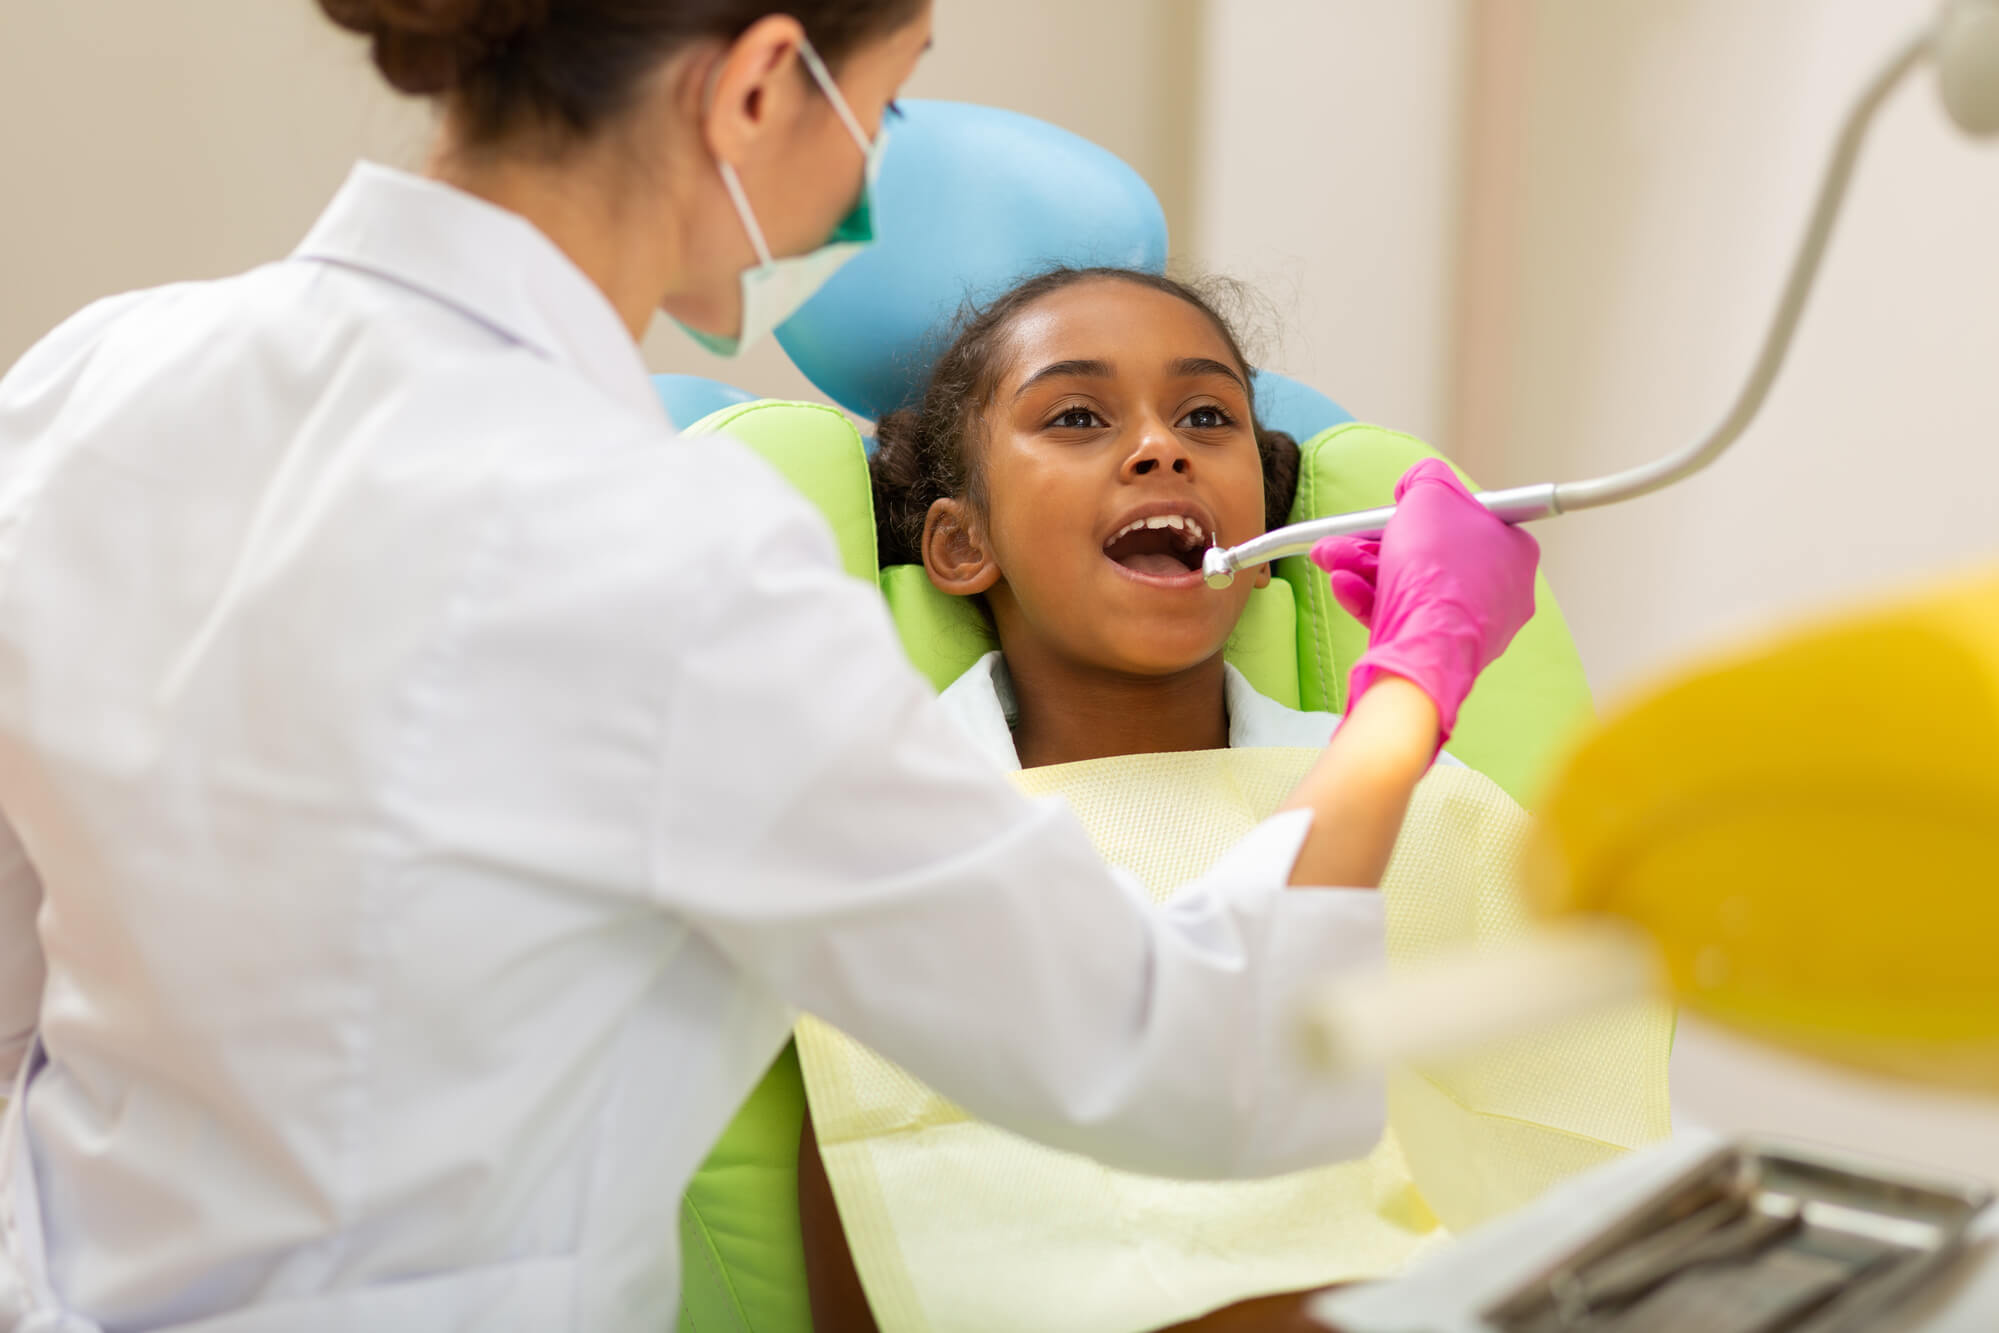 What Are the Most Common Dental Problems in Children?